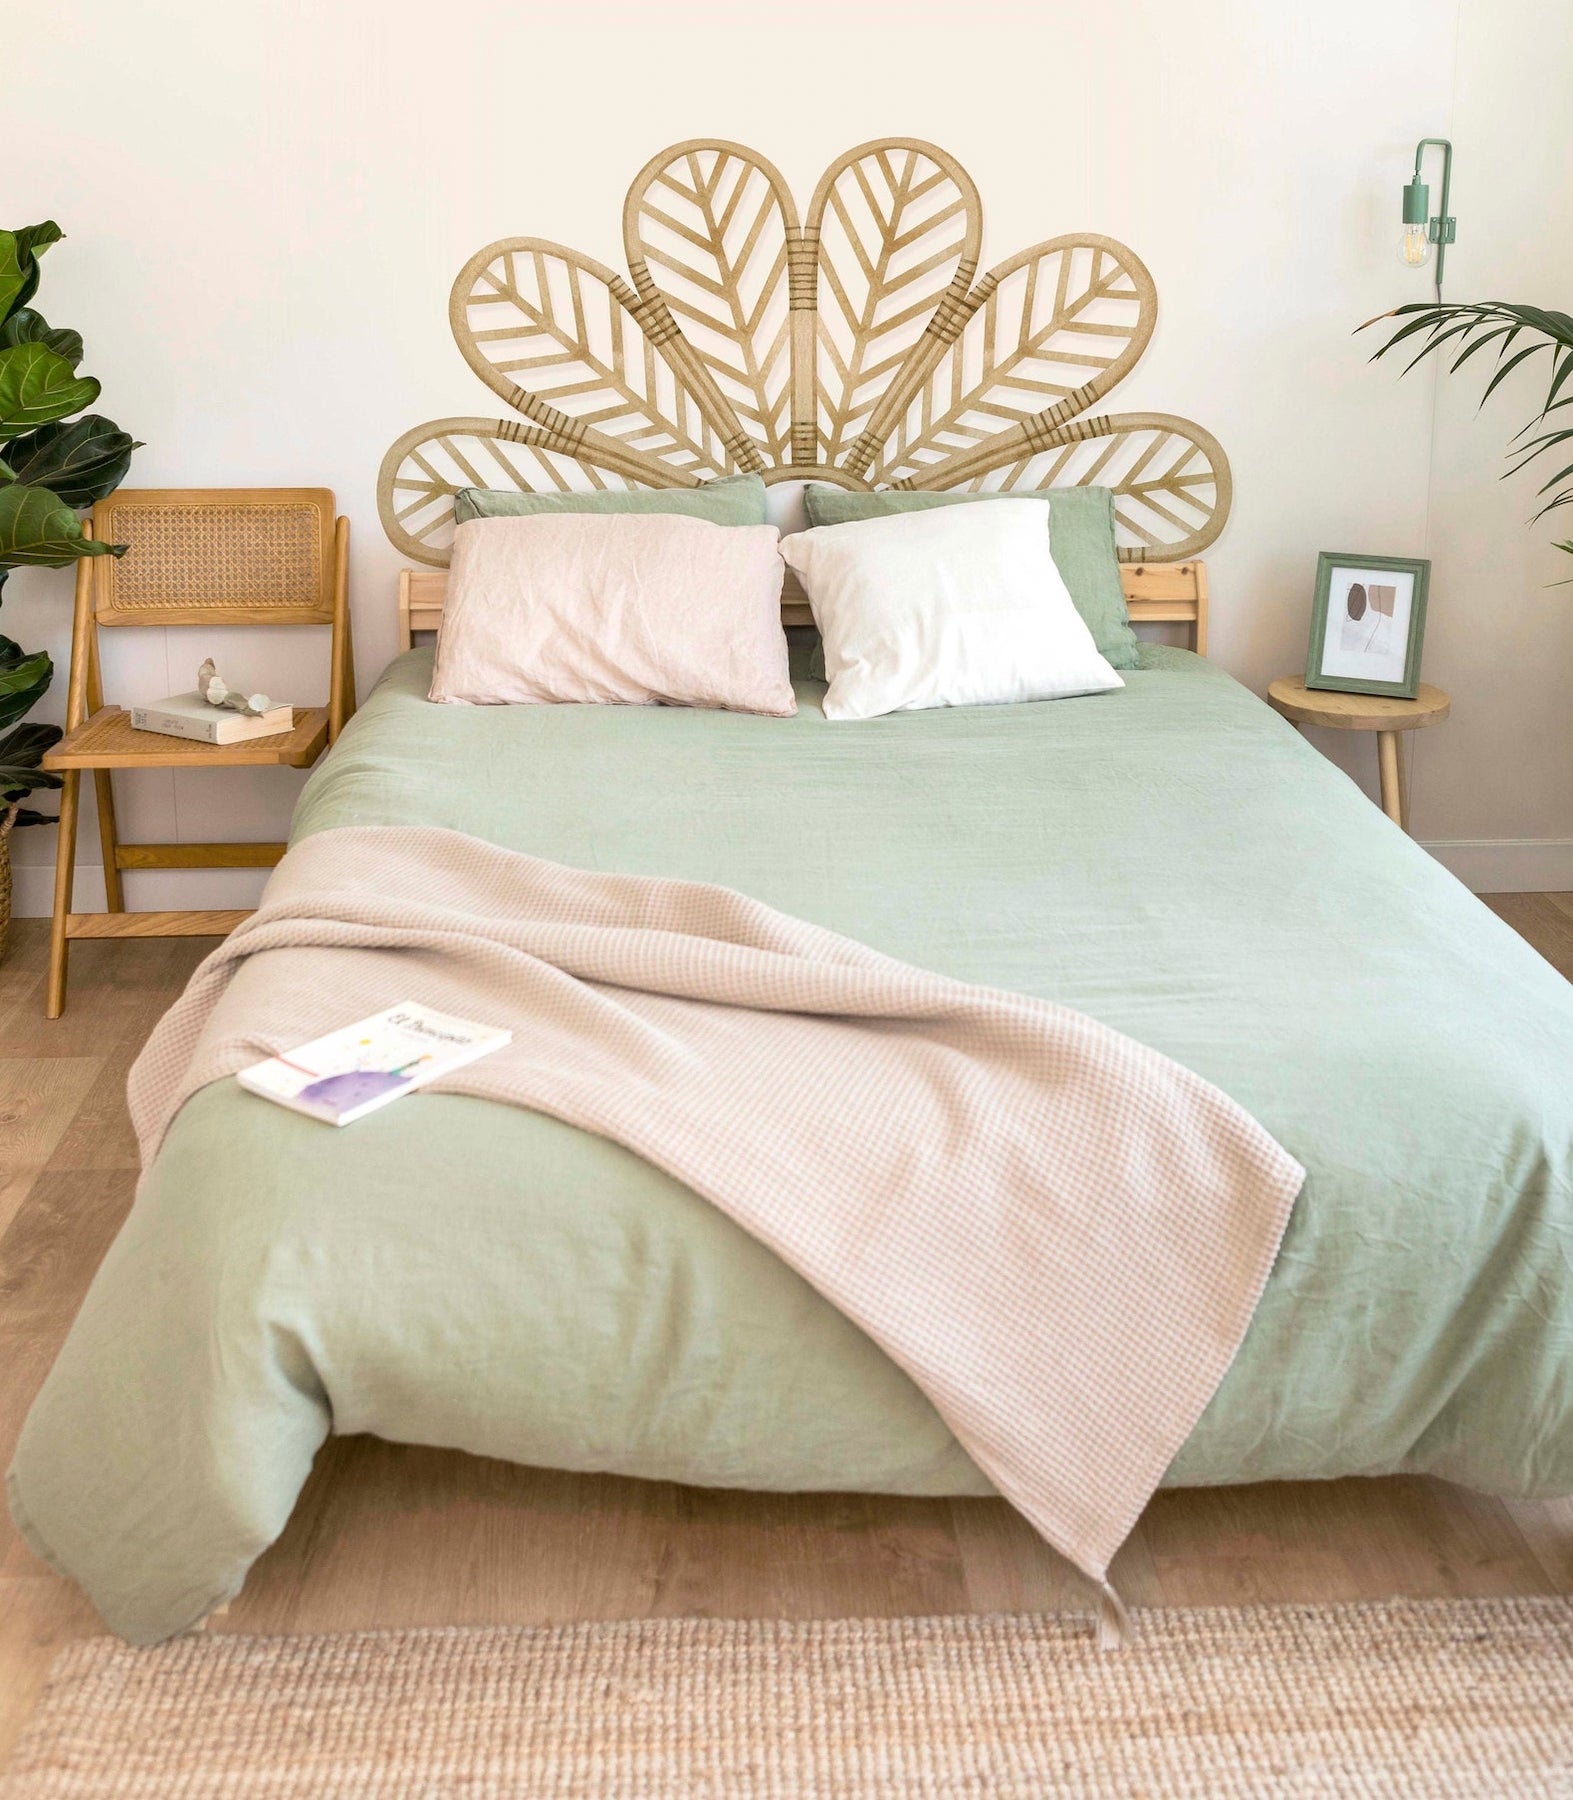 A decal that looks like wicker peacock feathers serves as a headboard for a bed with a green comforter and white and pink pillows. There is a folding chair in the background and a monstera leaf plant.